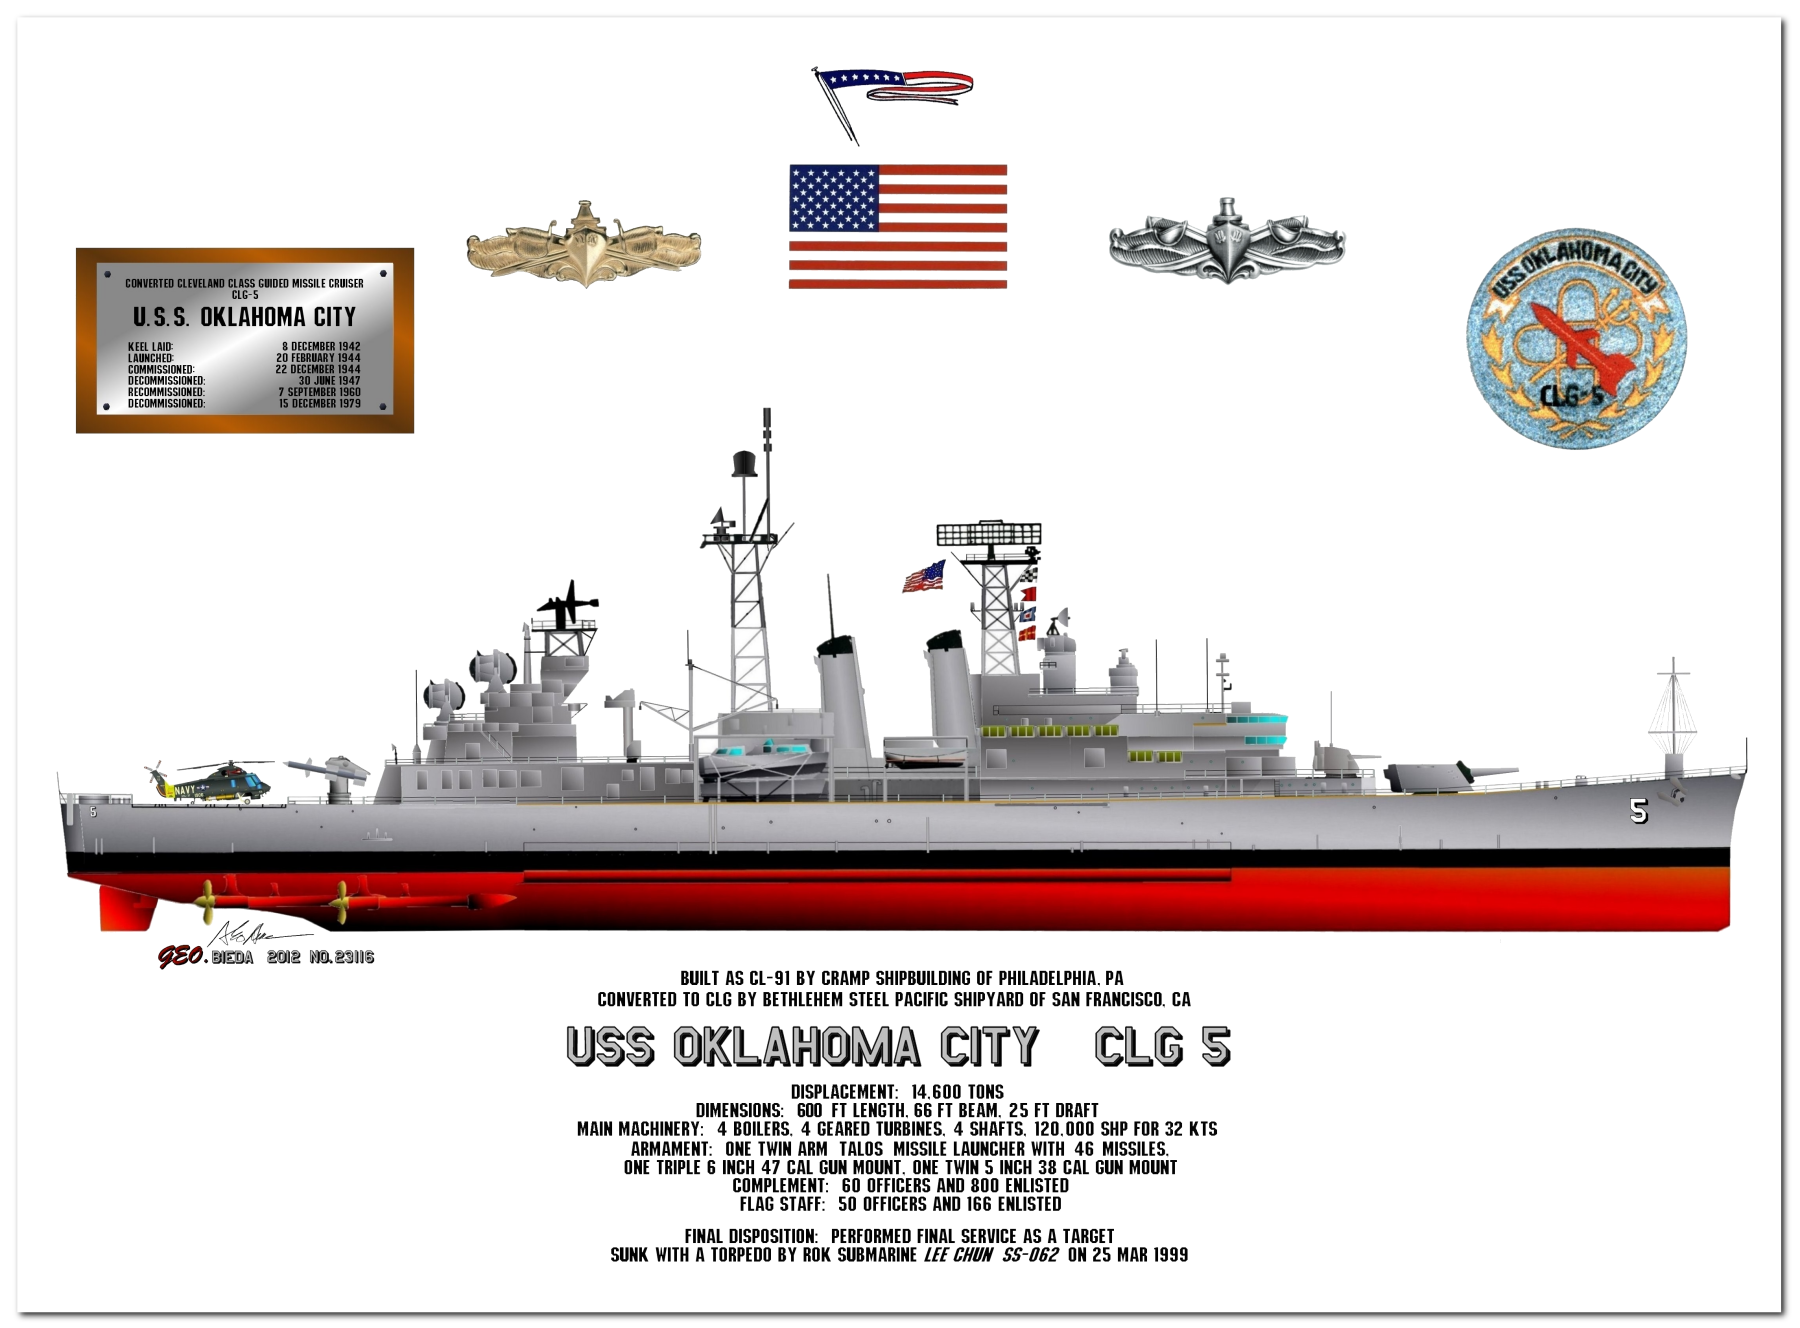 Cleveland Class Cruiser Profile Drawings by George Bieda